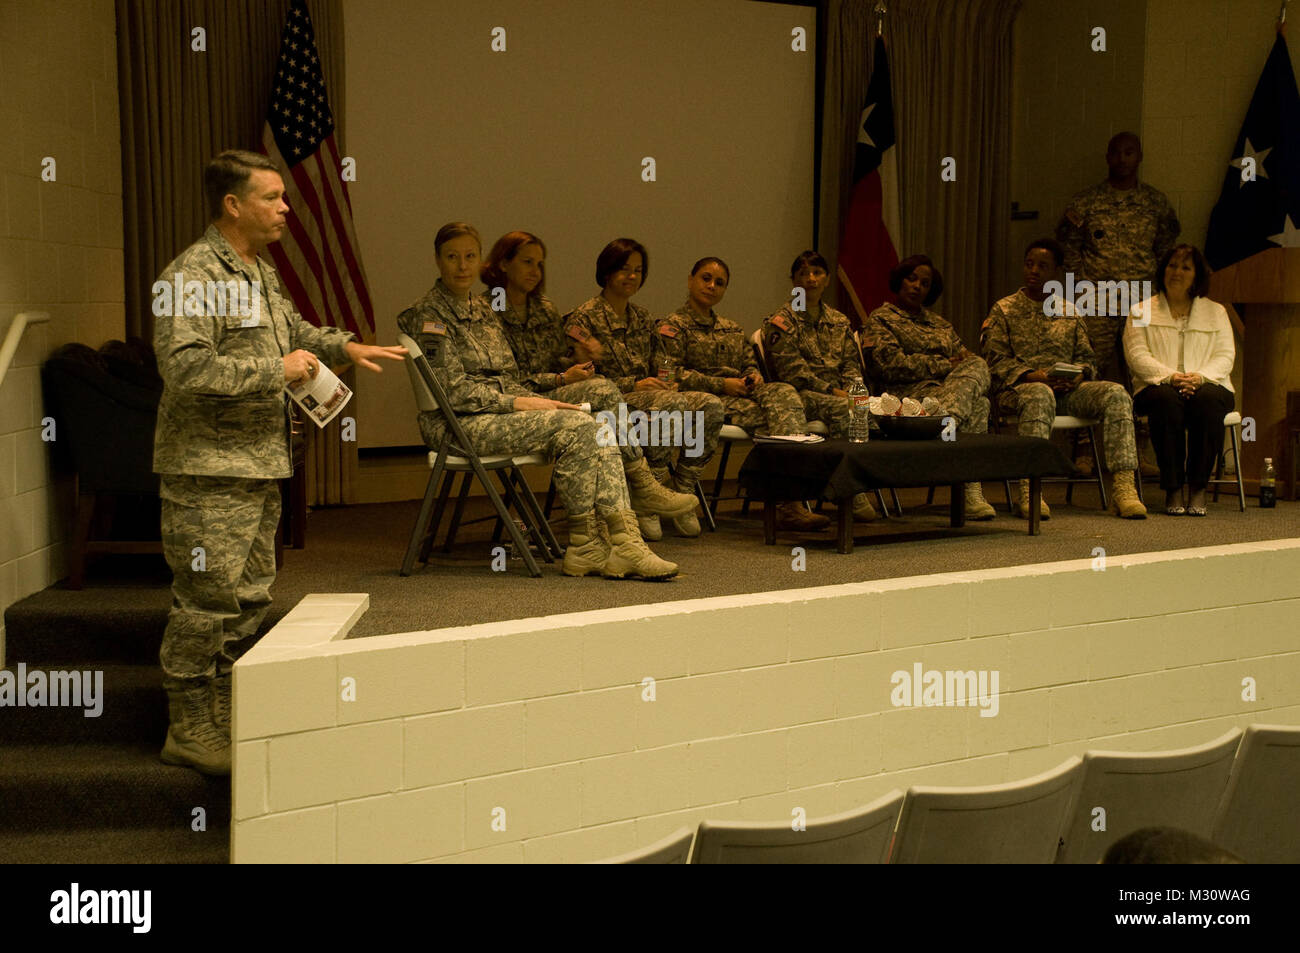 Maj. Gen. John F. Nichols, Texas Adjutant General speaks to assembled Texas Military Forces service members after the Senior Women in Leadership roundtable during the 2013 Adjutant General’s observance of Women’s History Month on March 26, 2013.  From left to right- Brig. Gen. Joyce L. Stevens, the Assistant Adjutant General-Army for the state of Texas, Col. Suzanne D. Adkinson, Commander of the Texas Counterdrug Task Force, Lt. Col. Joanne E. MacGregor, Deputy Director of Government Affairs, Lt. Col. Alba M Villanueva, branch manager for Family Support Services, Chief Warrant Officer 4 Arsili Stock Photo